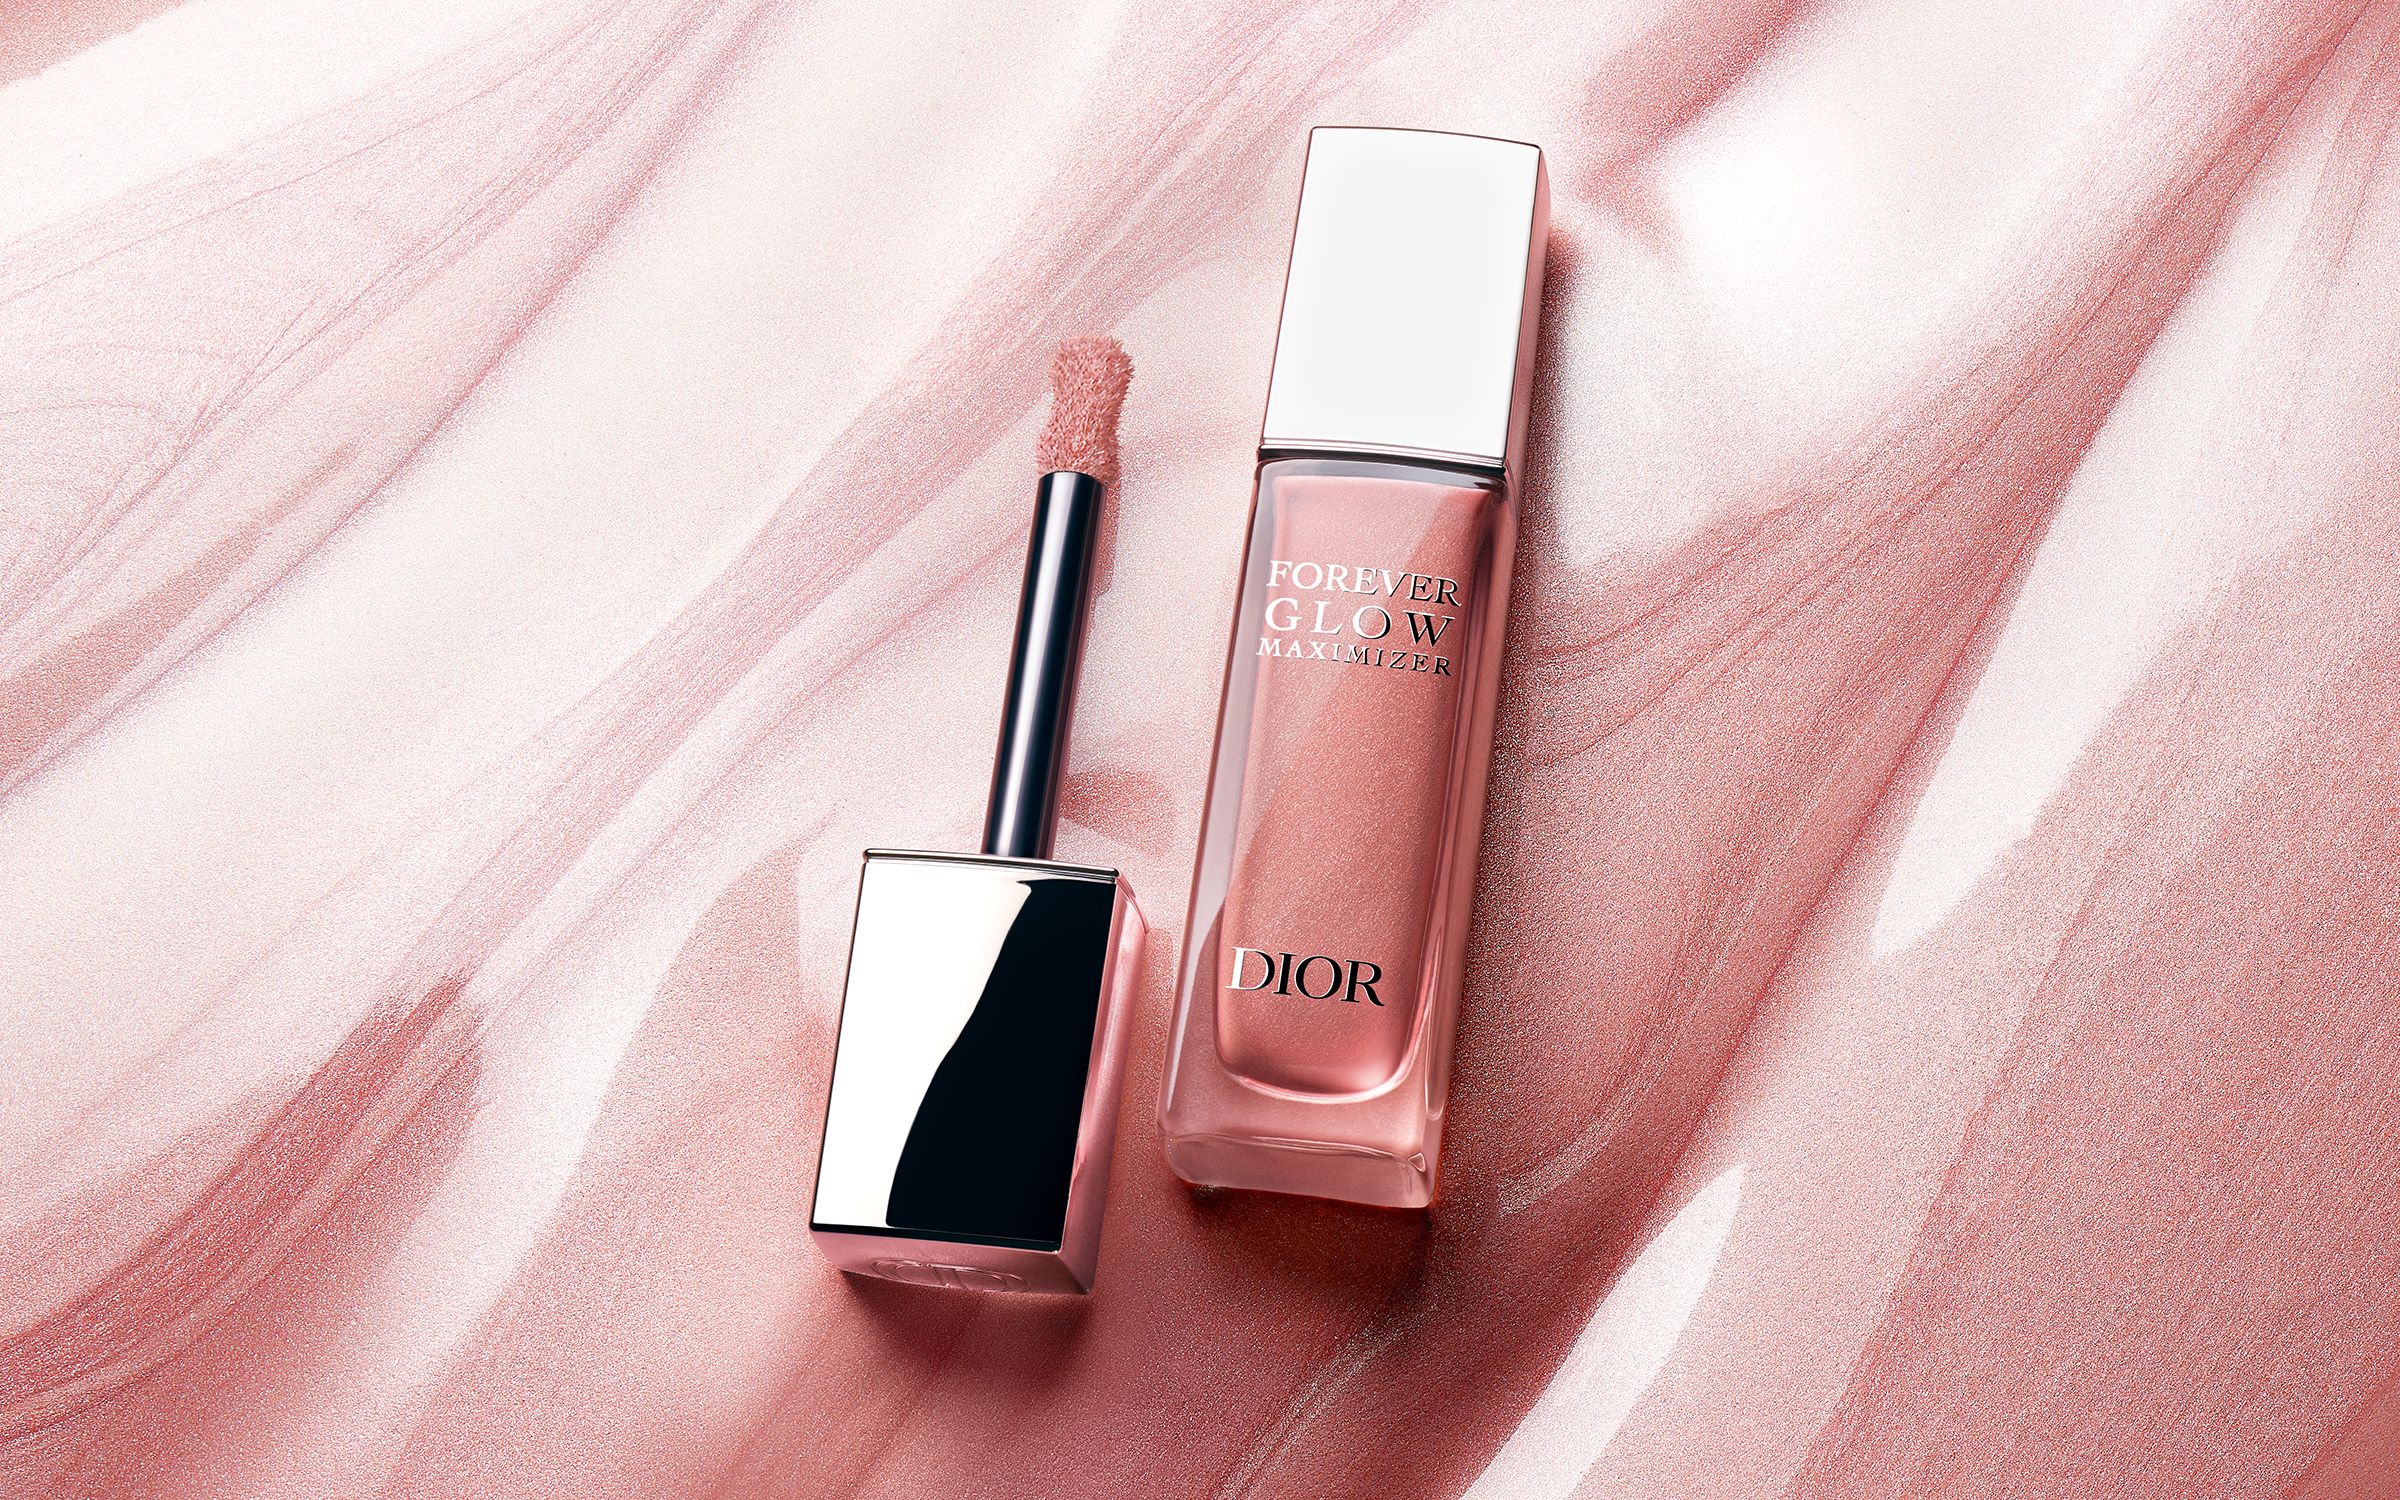 Image of DIOR Forever Glow Maximiser in pink